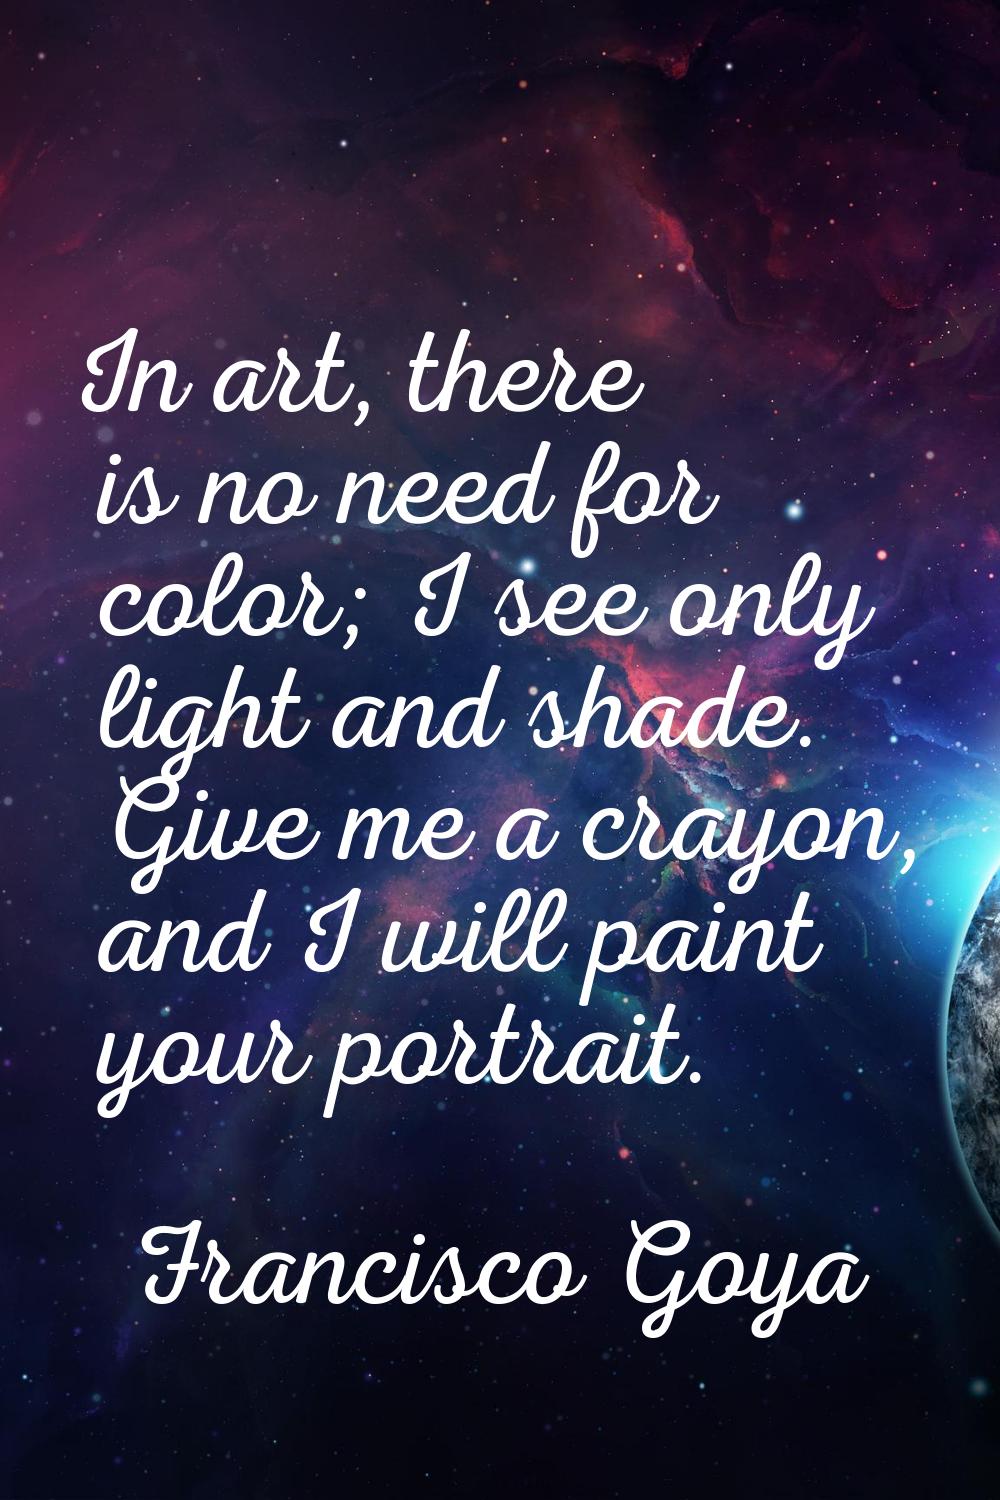 In art, there is no need for color; I see only light and shade. Give me a crayon, and I will paint 